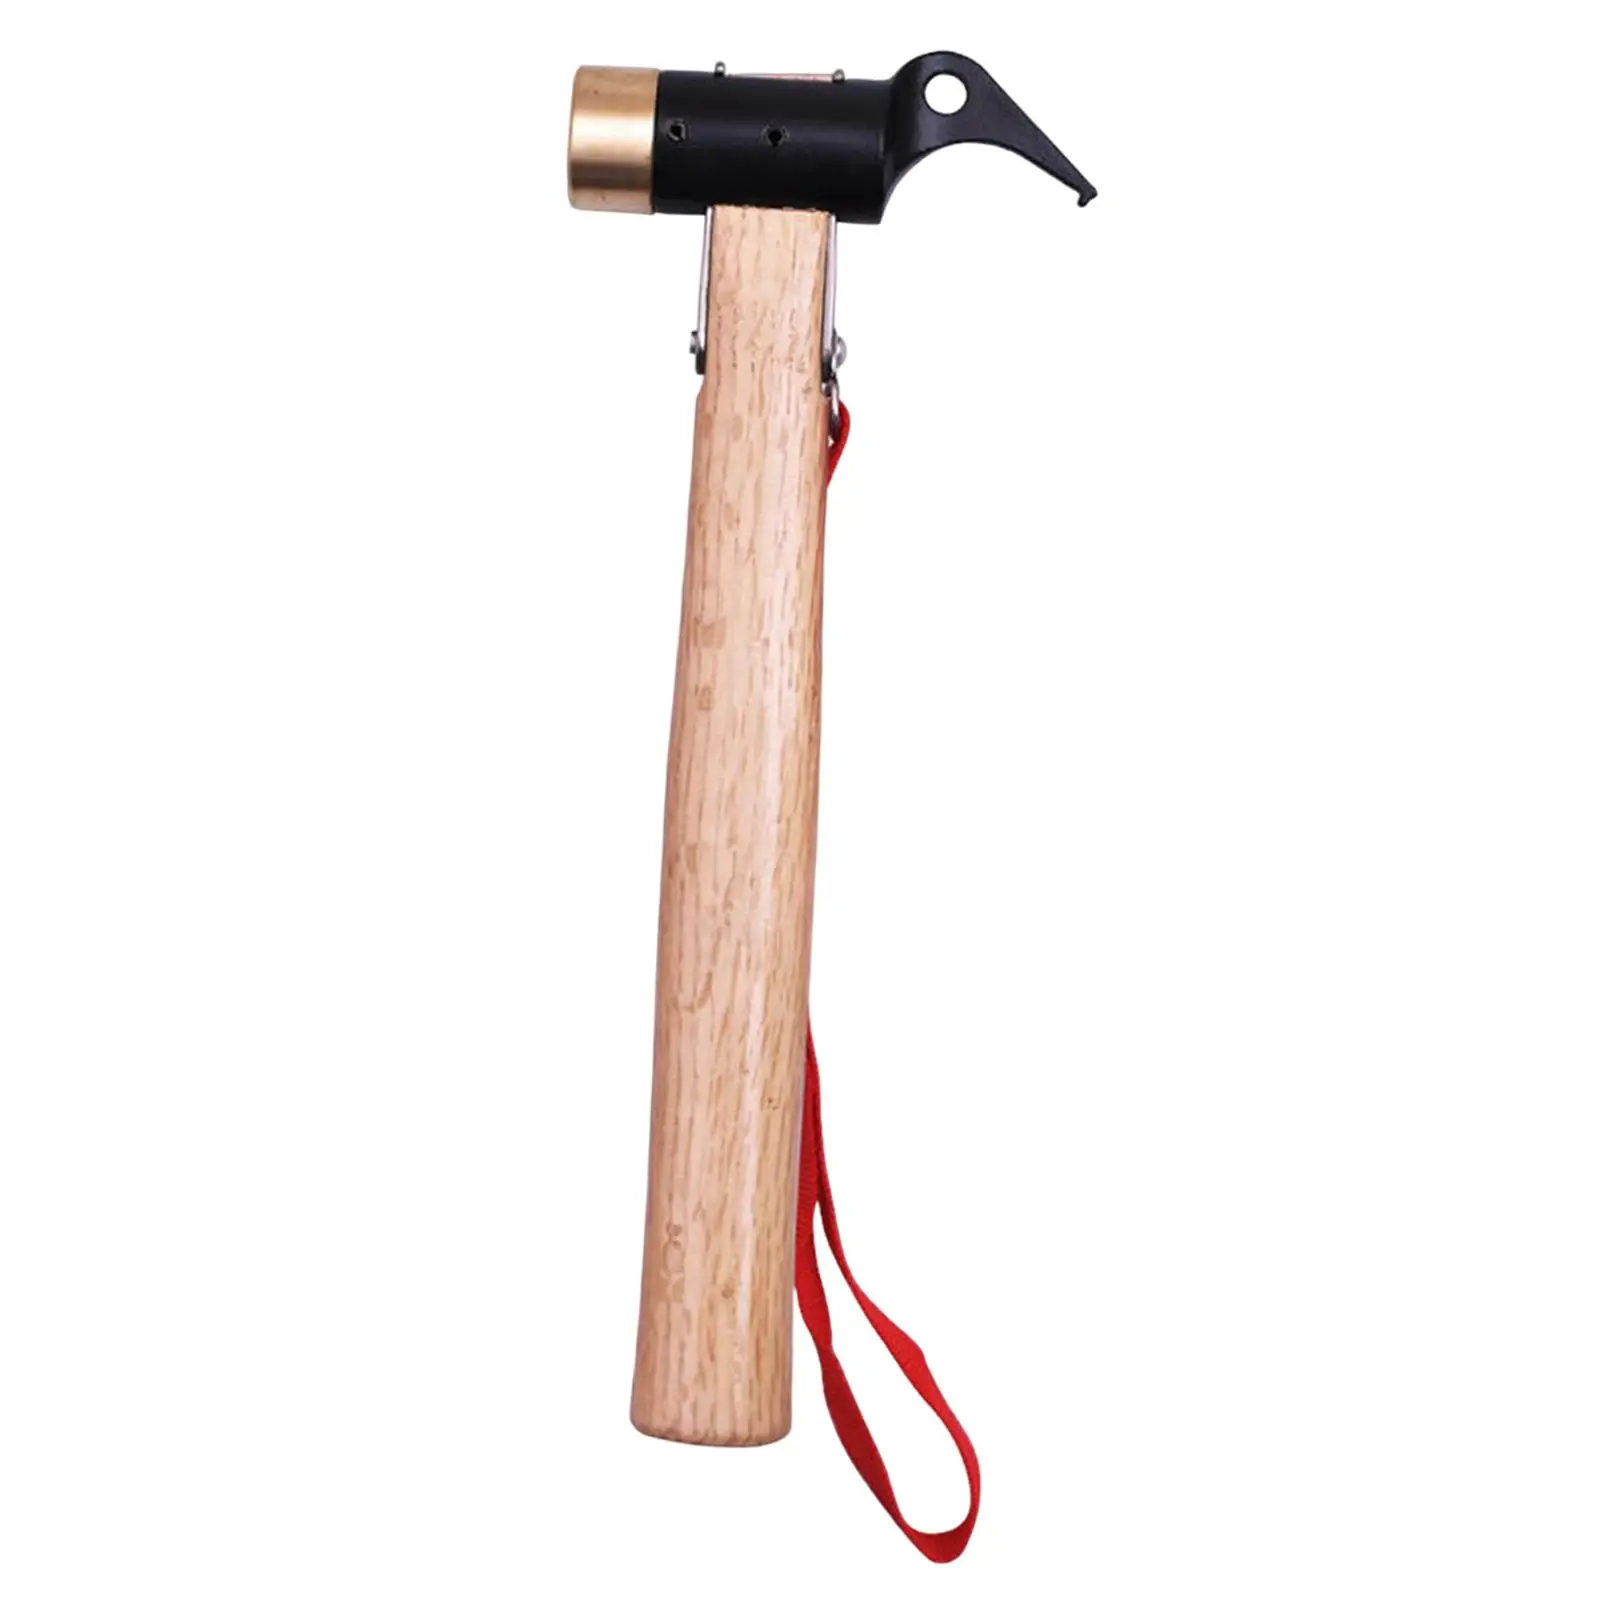 Tent Stake Hammer Multifunctional Equipment with Wooden Handle Nails Puller Tent